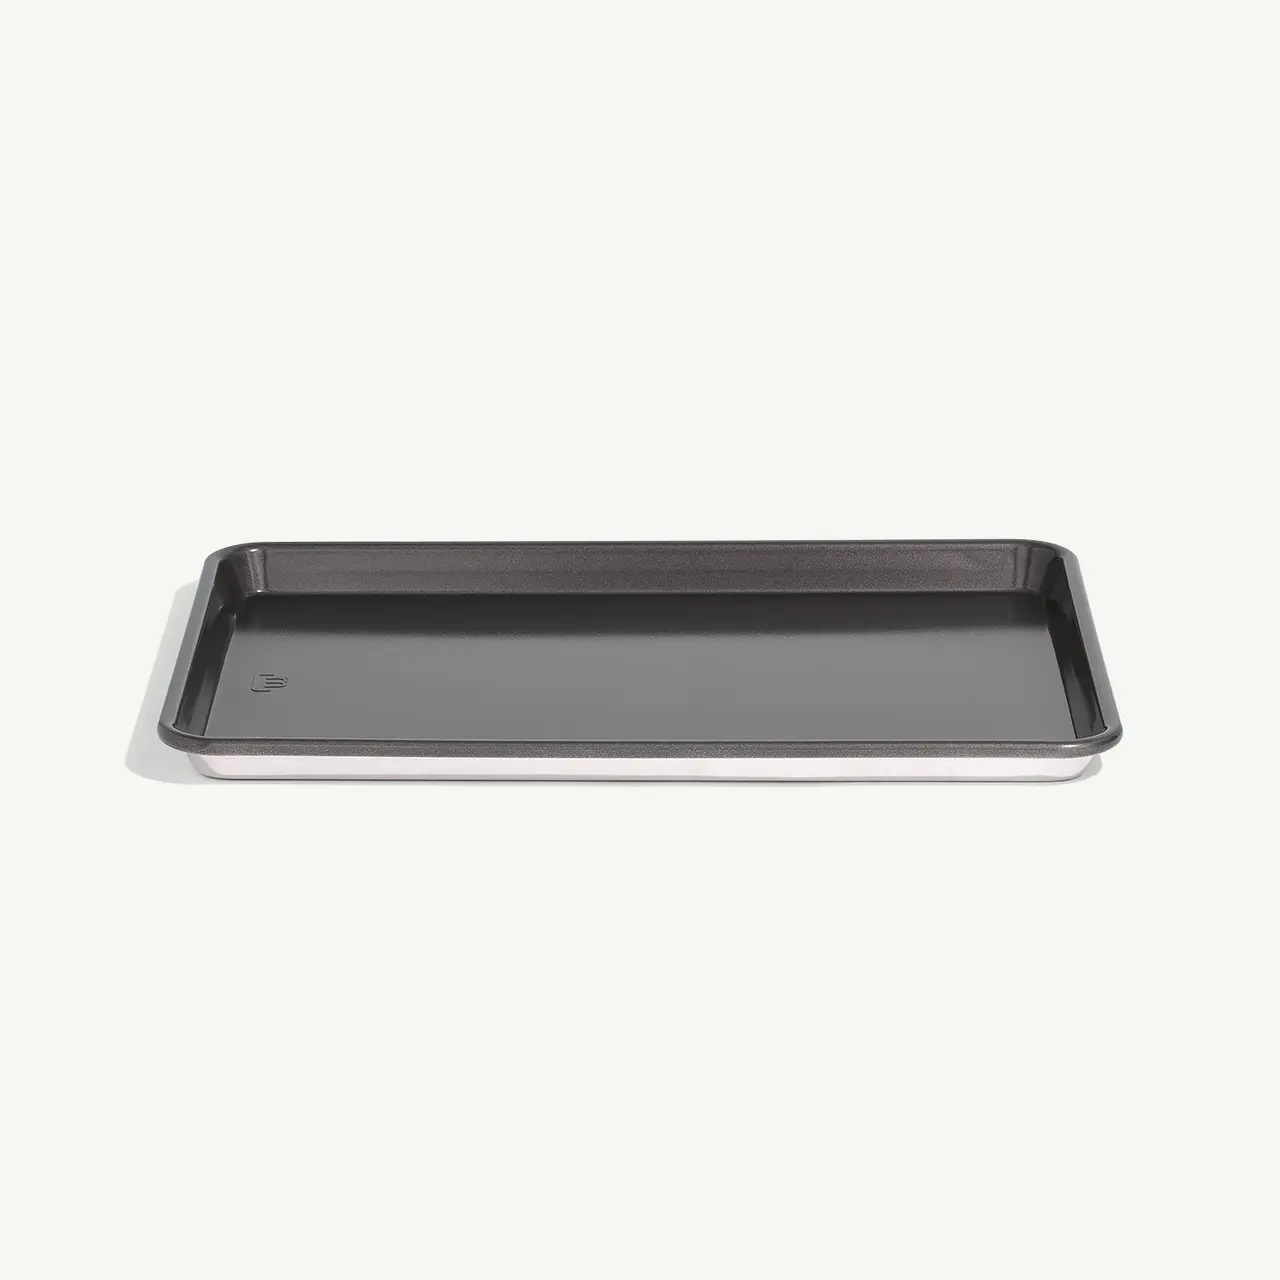 A rectangular, shallow, metal baking tray on a plain background.